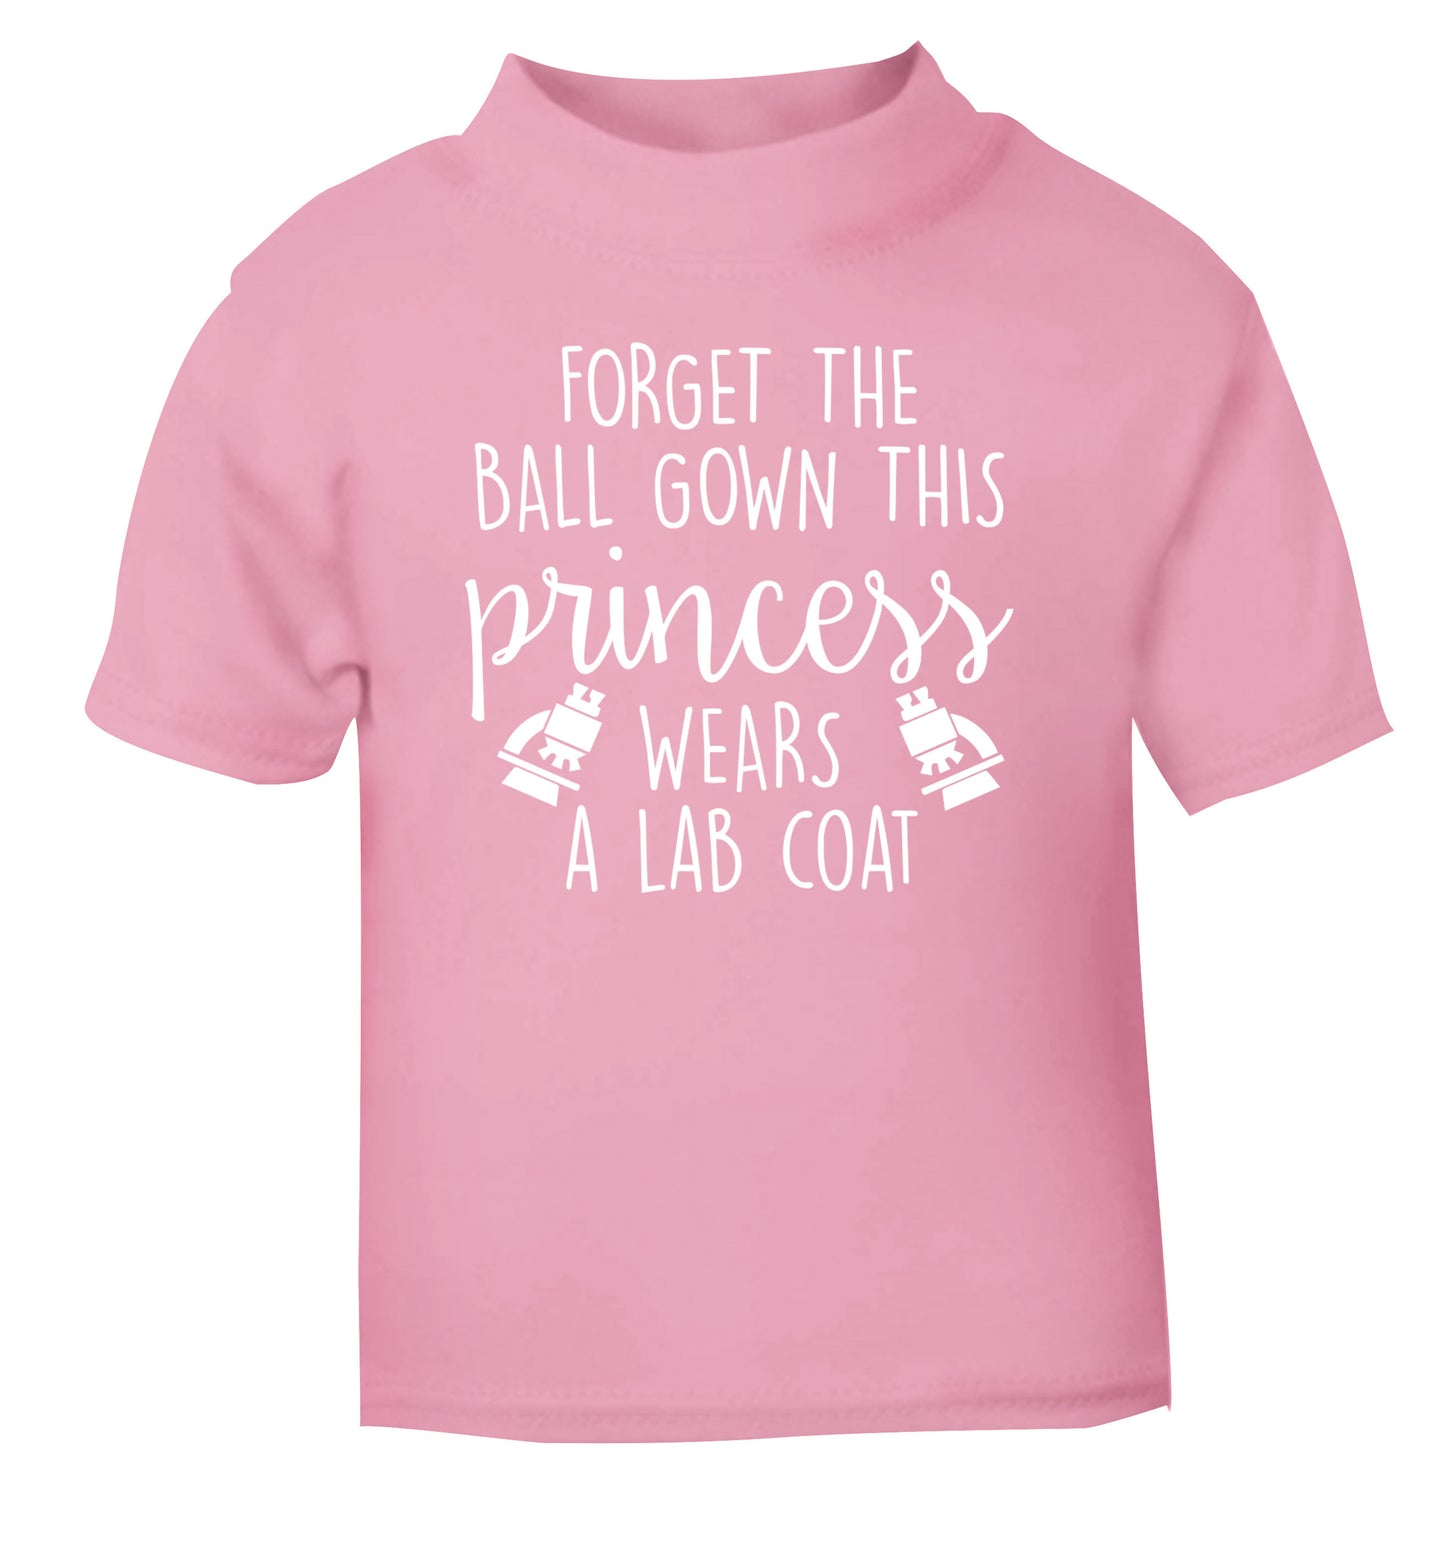 Forget the ball gown this princess wears a lab coat light pink Baby Toddler Tshirt 2 Years